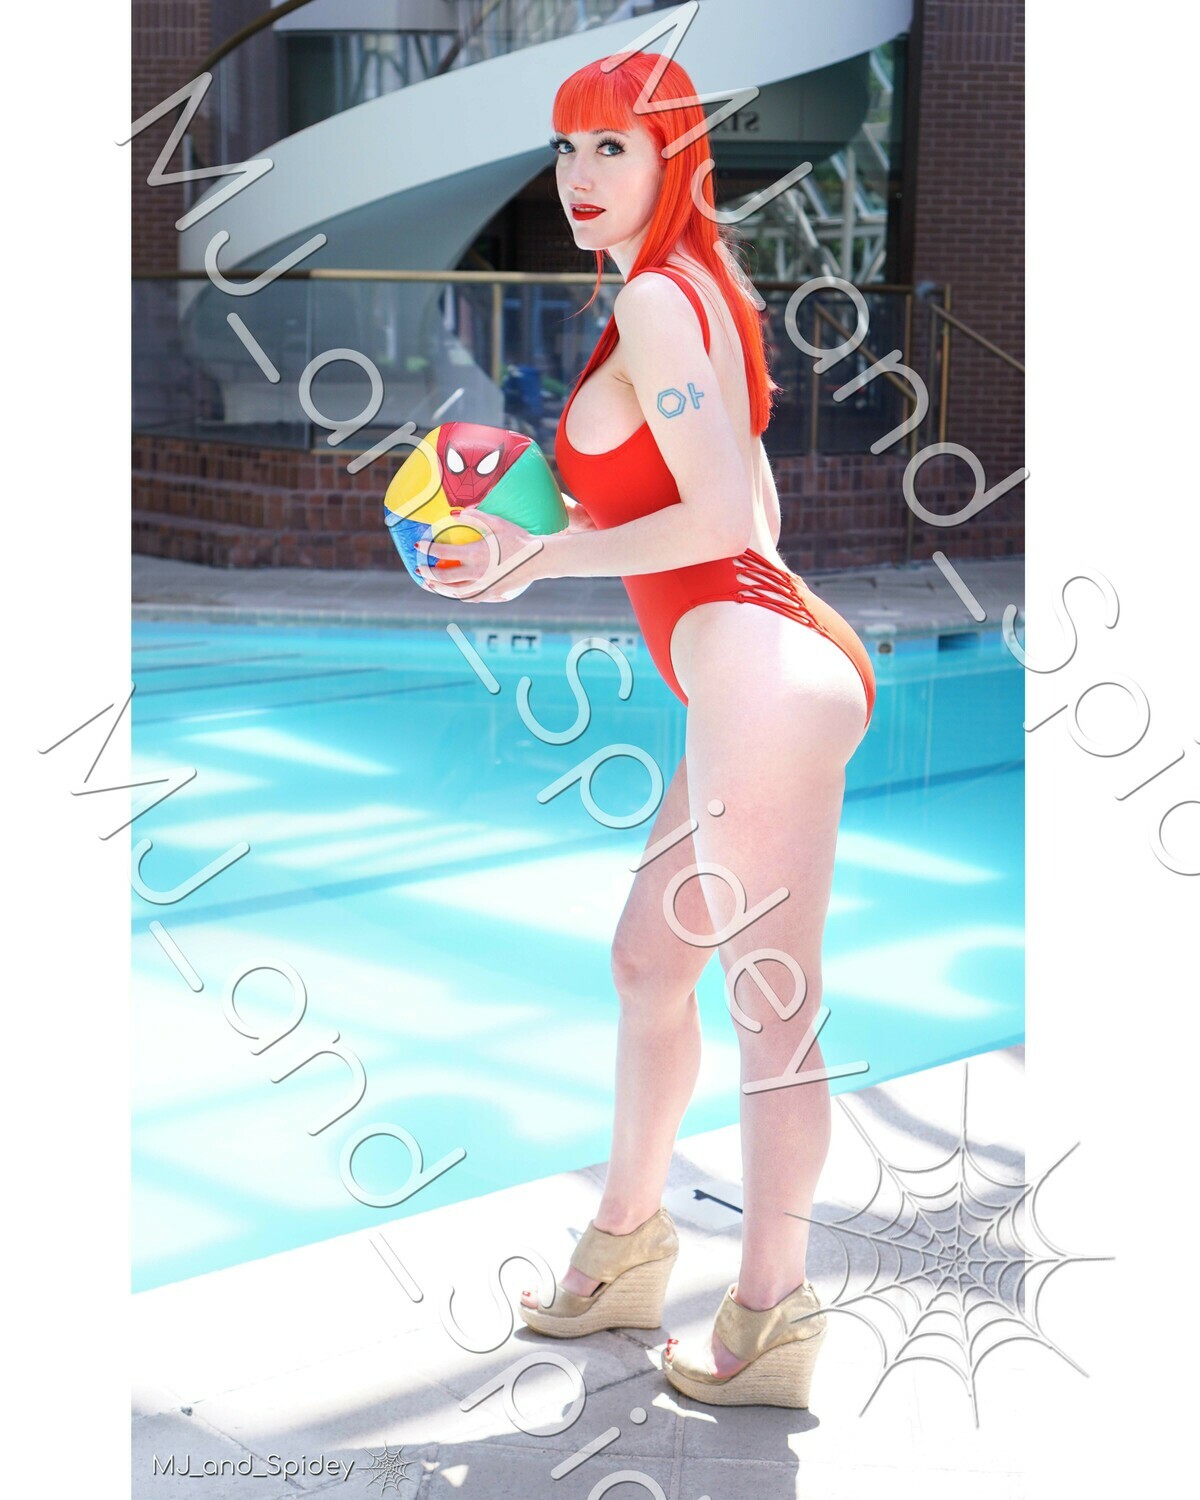 Marvel - Spider-Man - Mary Jane Watson - Swimsuit 2 - Digital Cosplay Image (@MJ_and_Spidey, MJ and Spidey, Comics)